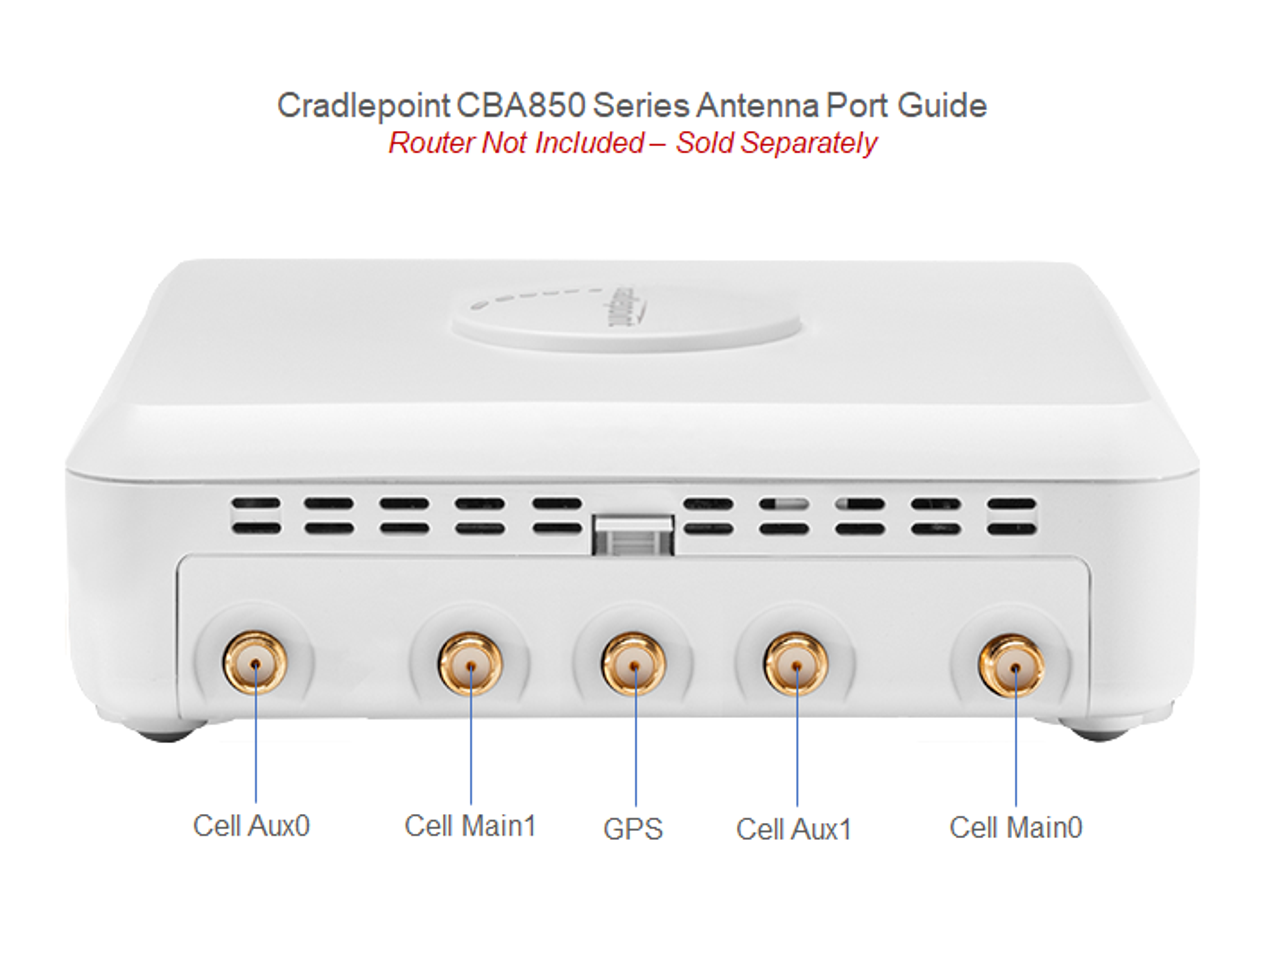 Cradlepoint CBA850 Antenna Port Guide - Router Not Included